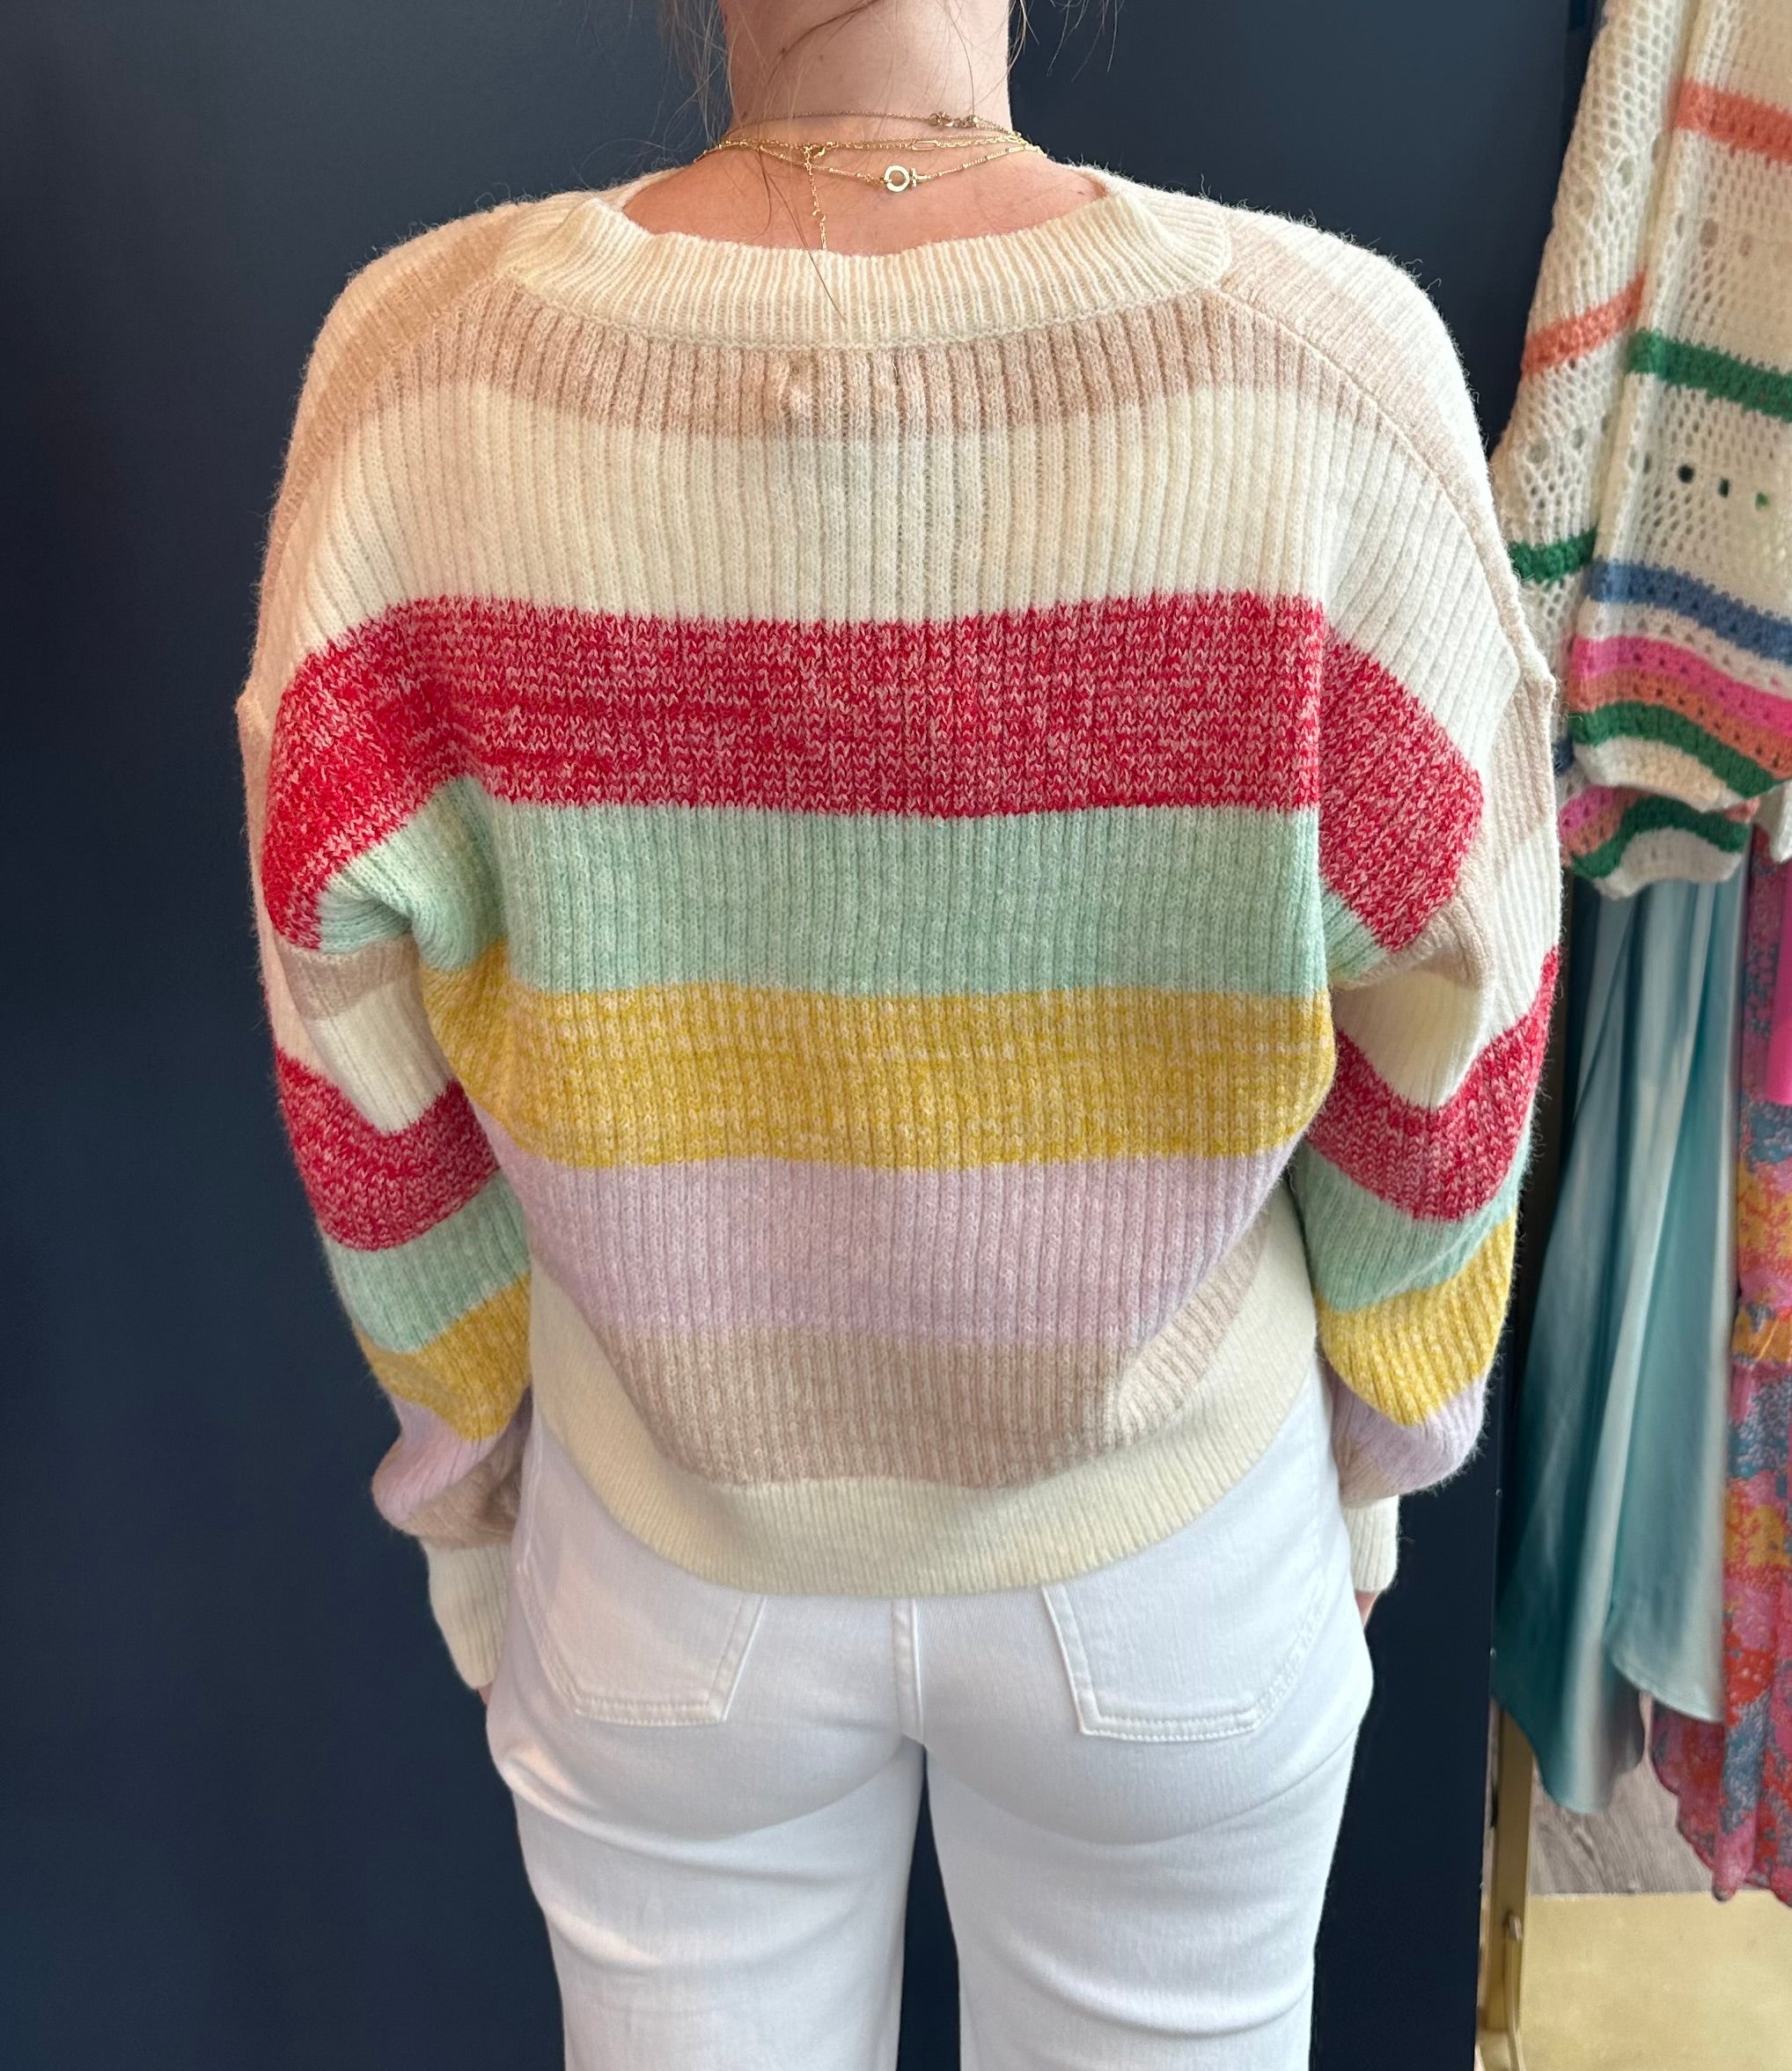 The ‘Evie Sweater'